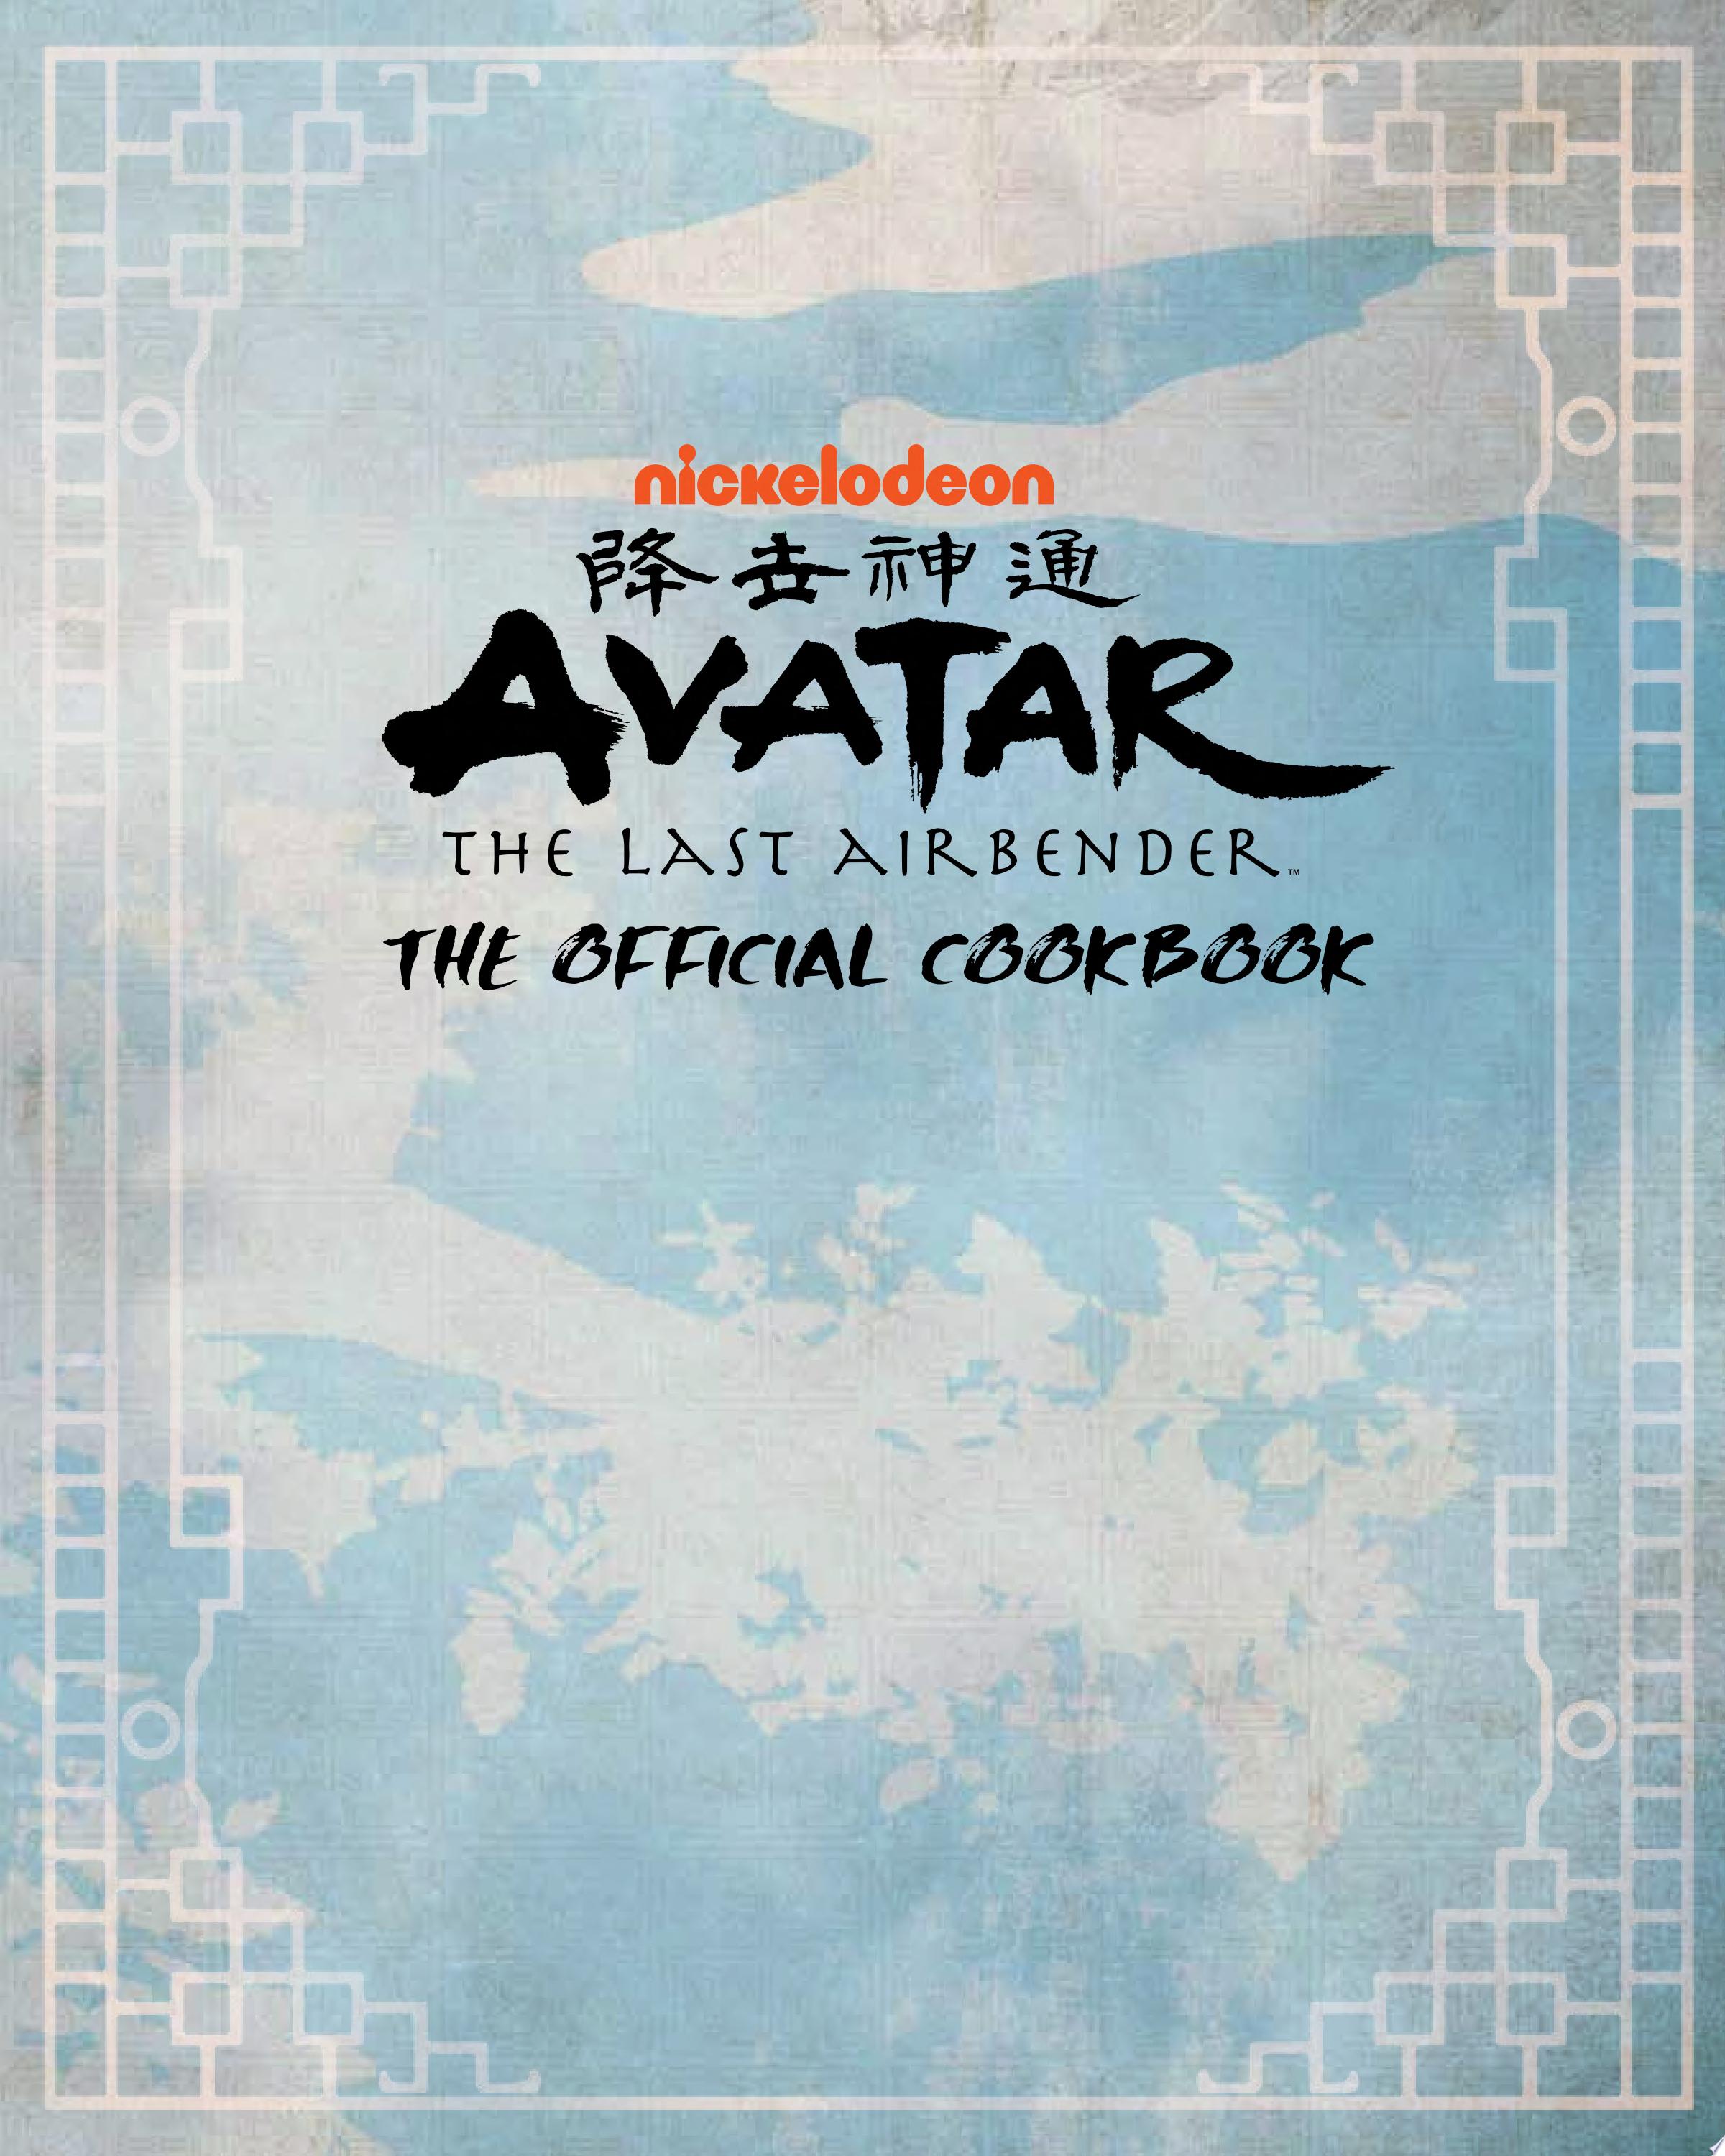 Image for "Avatar: The Last Airbender: The Official Cookbook"